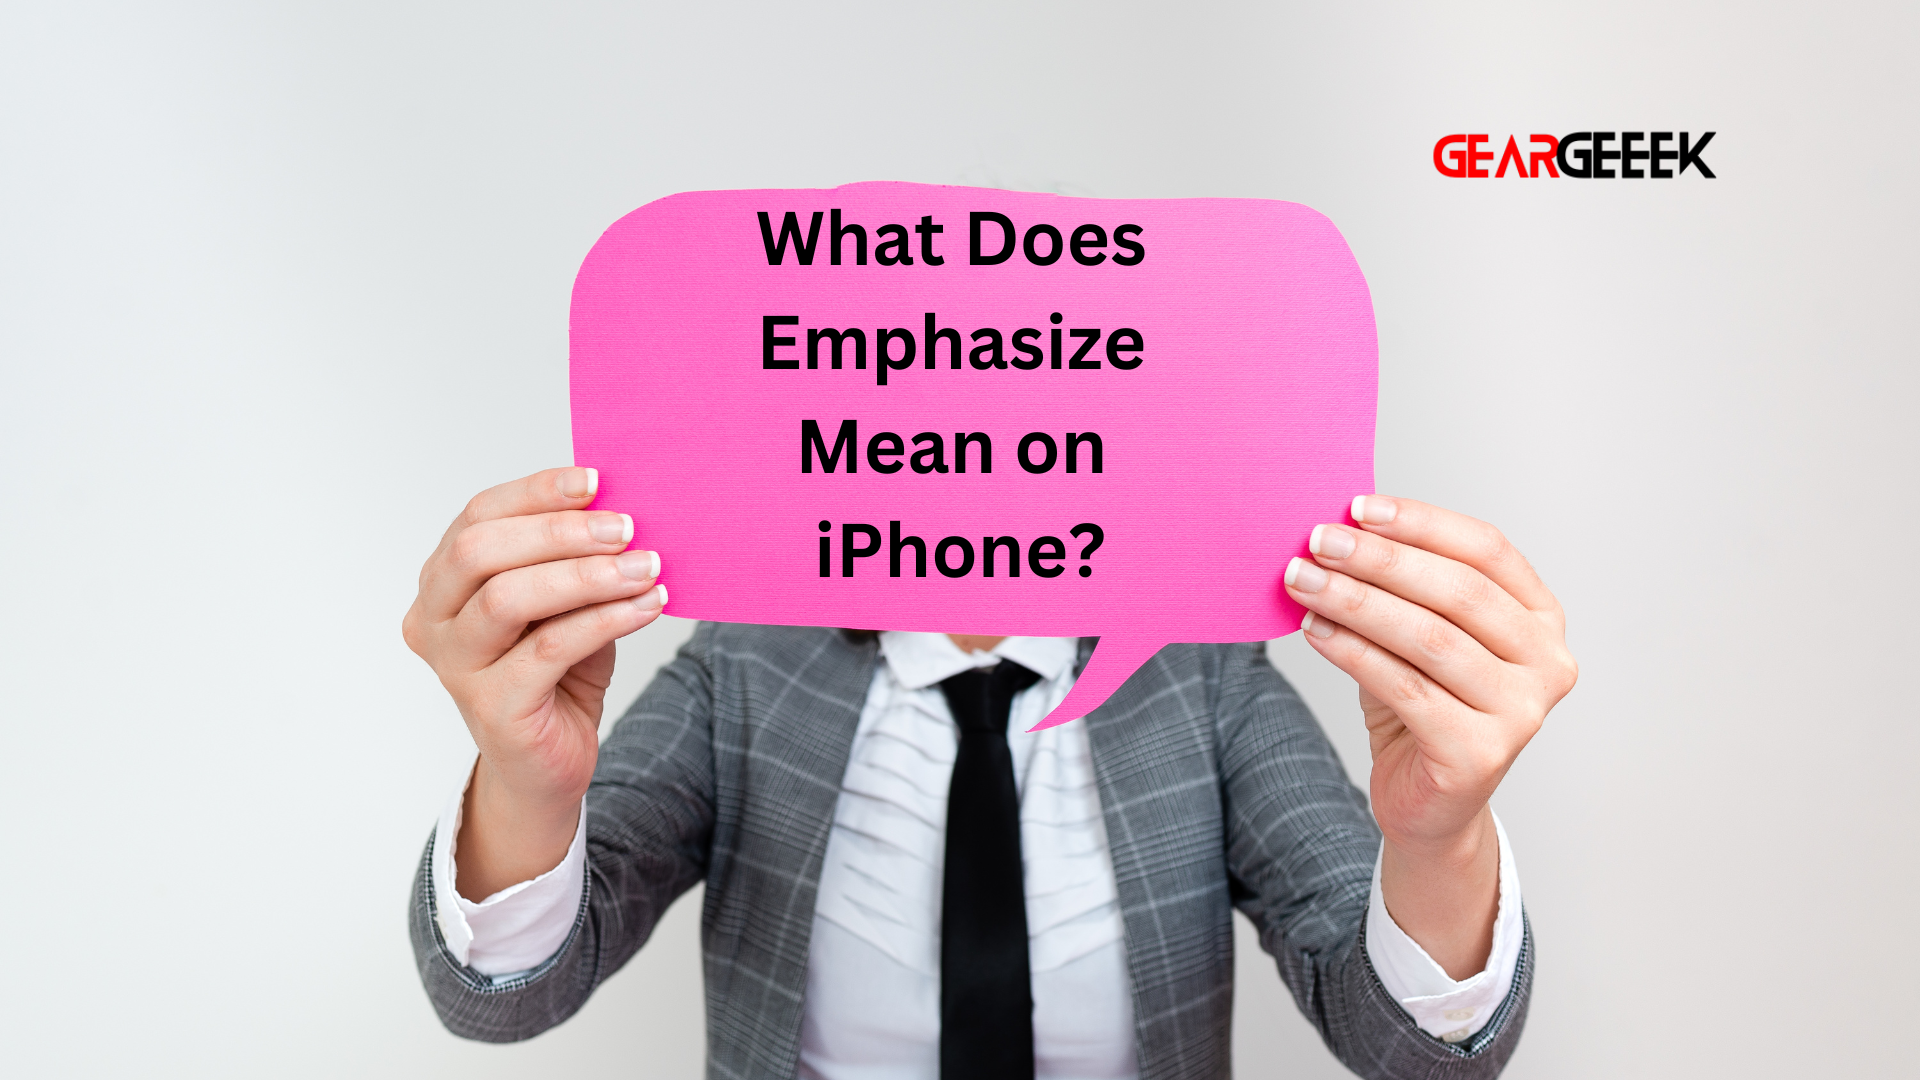 What does emphasize mean on iPhone